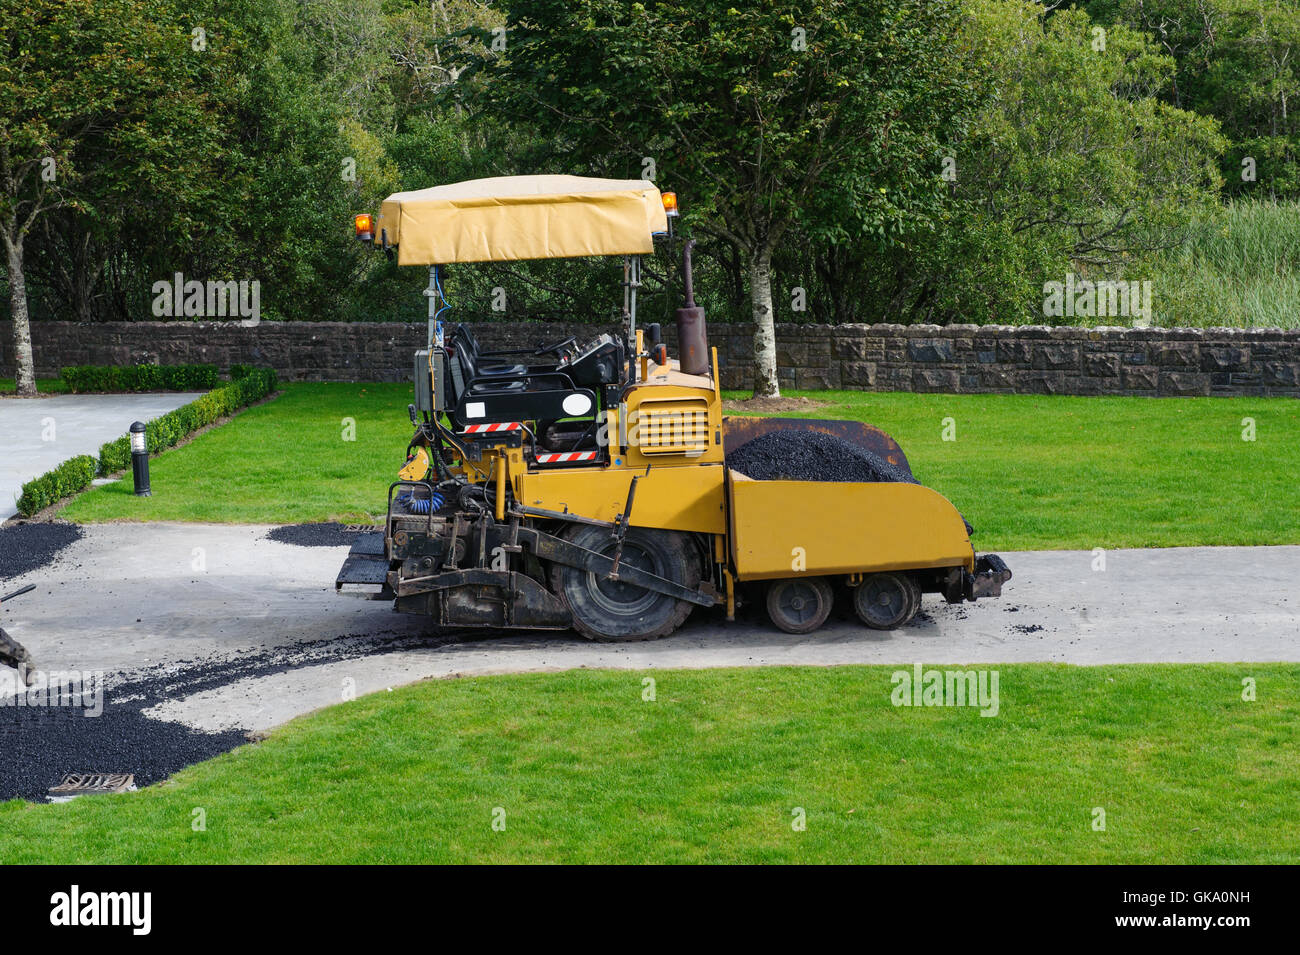 asphalt spreader machine with yellow color working in outside Stock Photo